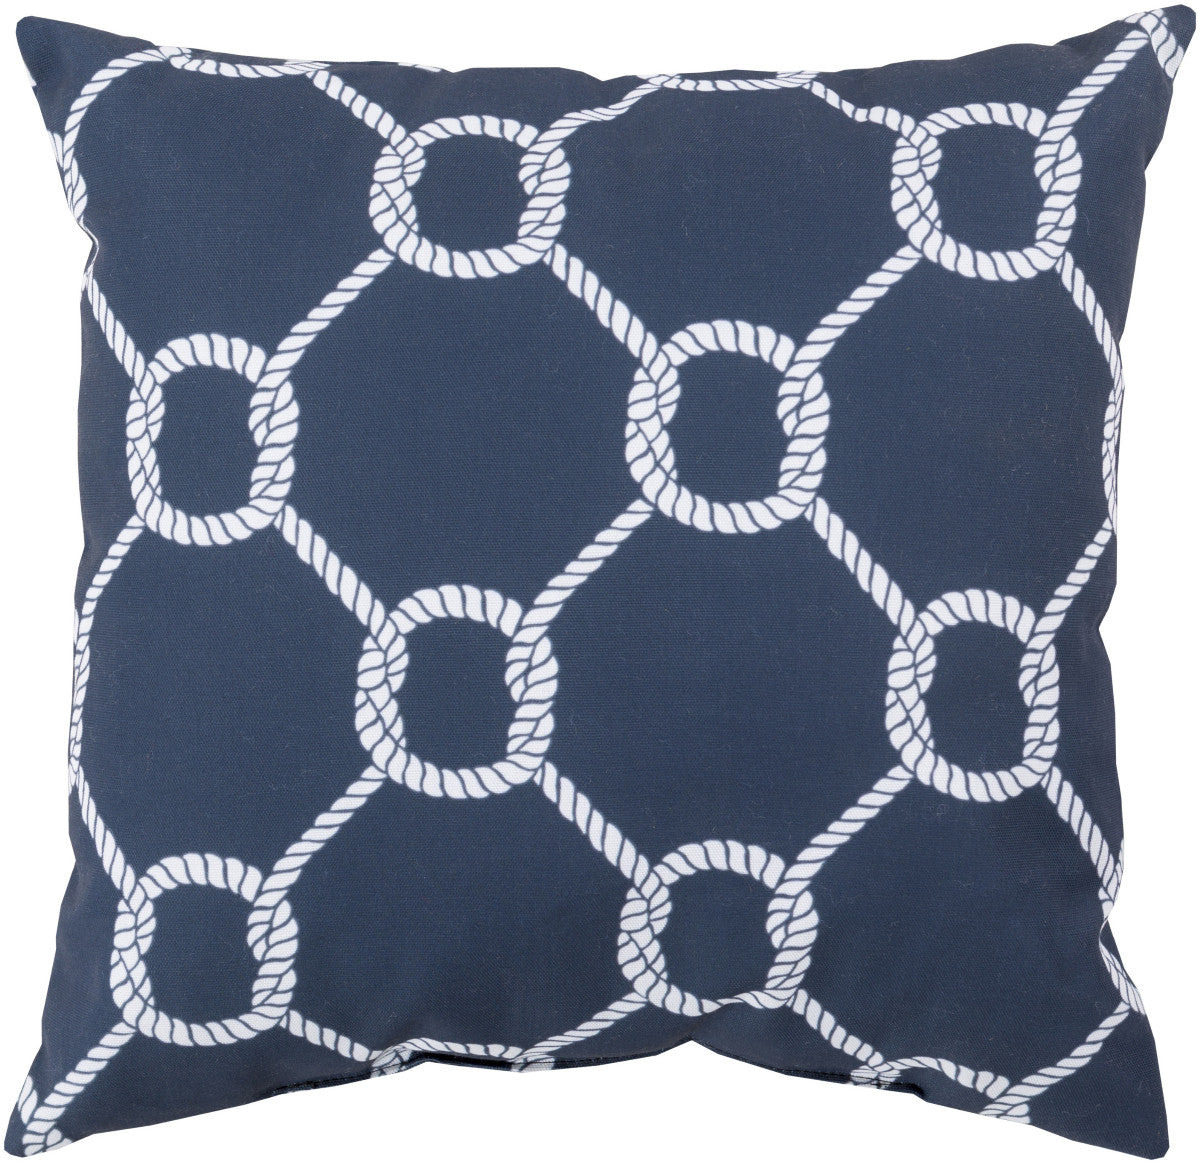 Surya Rain Tied up in Delight RG-146 Pillow